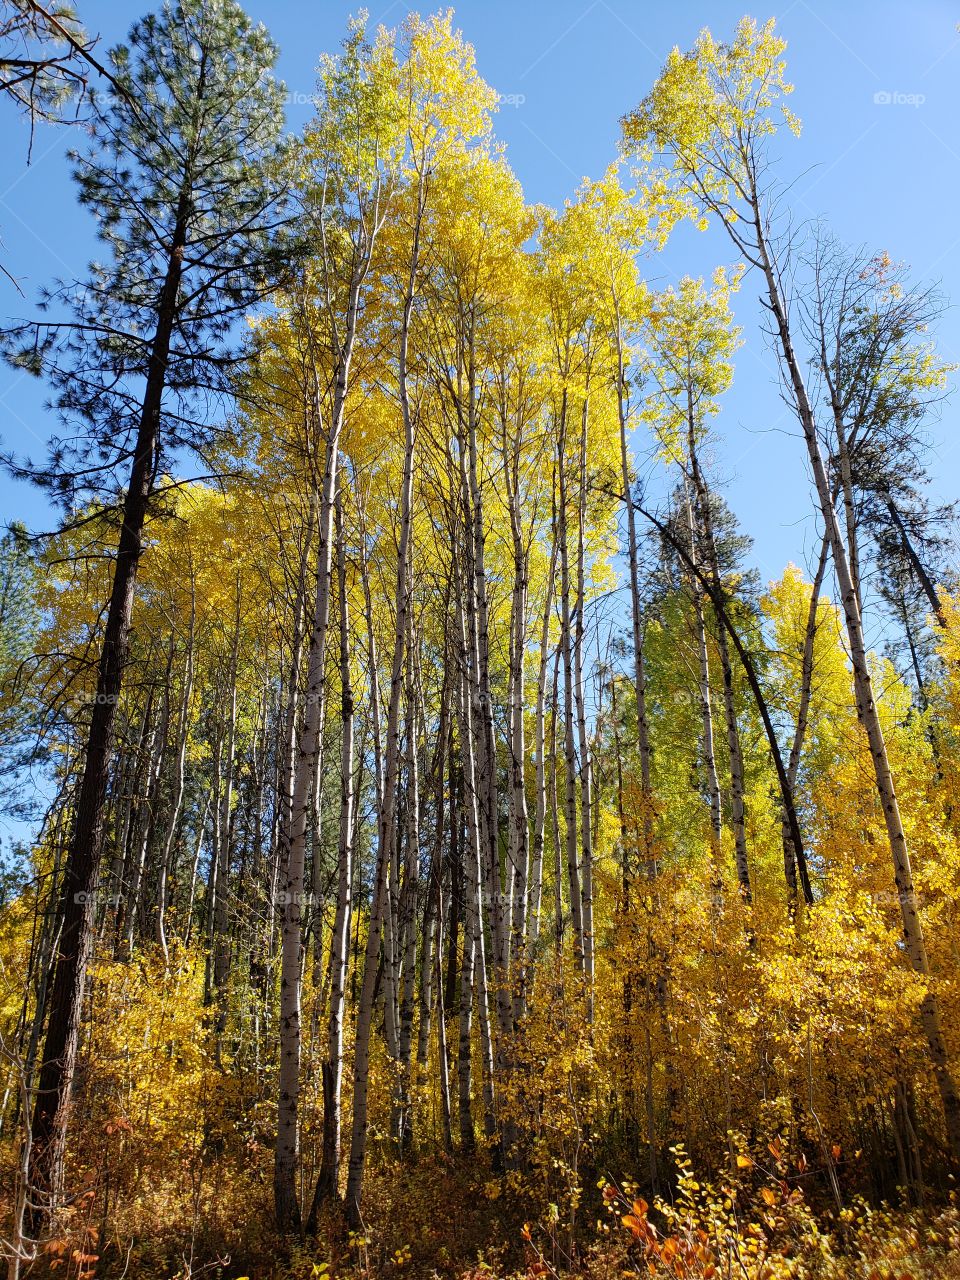 Magnificent ponderosa pine trees grow with aspen trees with leaves of golden yellow fall colors along the banks of Indian Ford Creek in the forests of Central Oregon on a sunny autumn day.